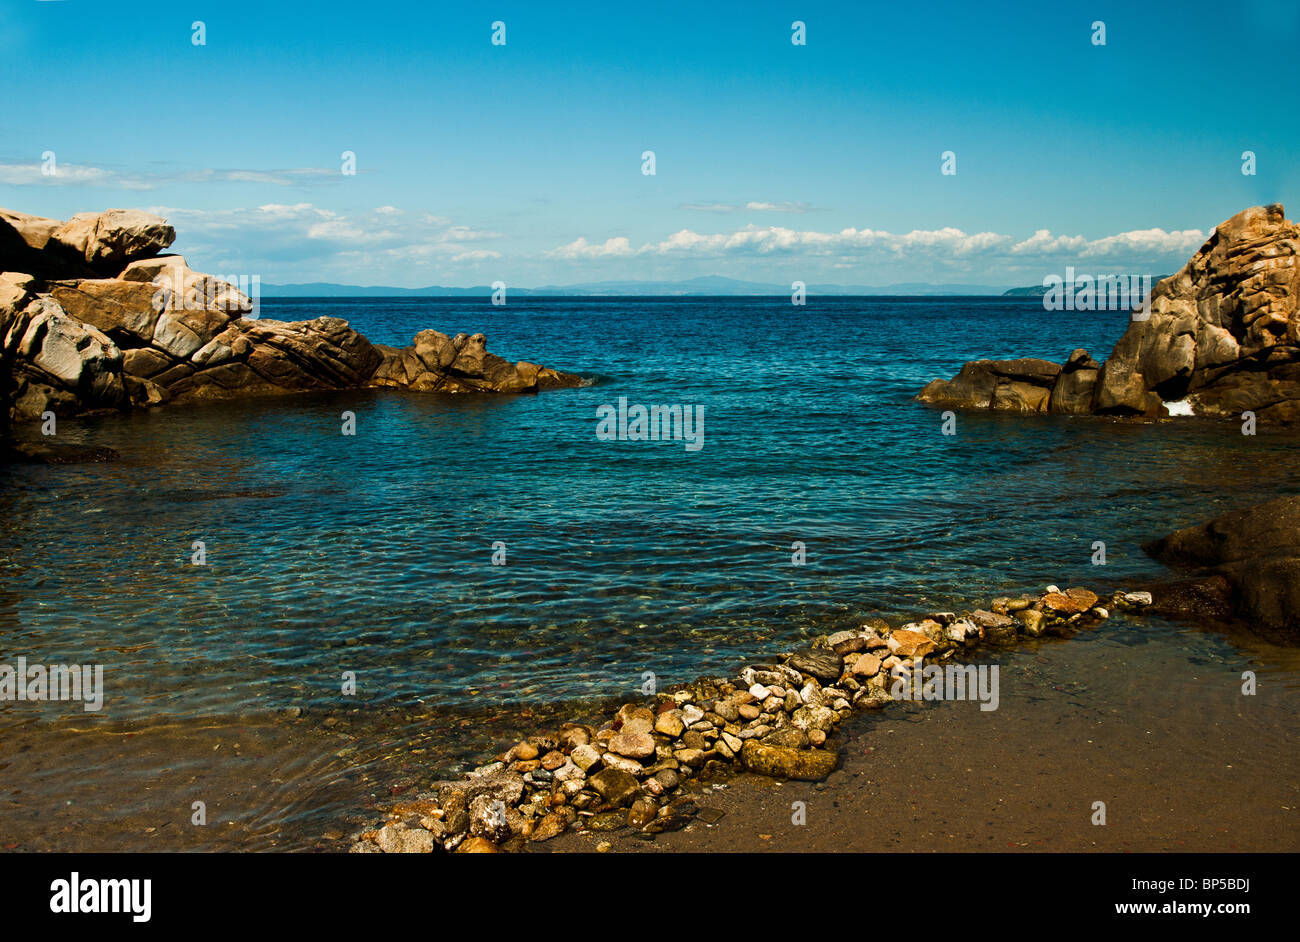 Bay of saracen  sea isle Giglio tuscan arcipelago resumed in the afternoon hours. Isola del Giglio Cala saracino Stock Photo